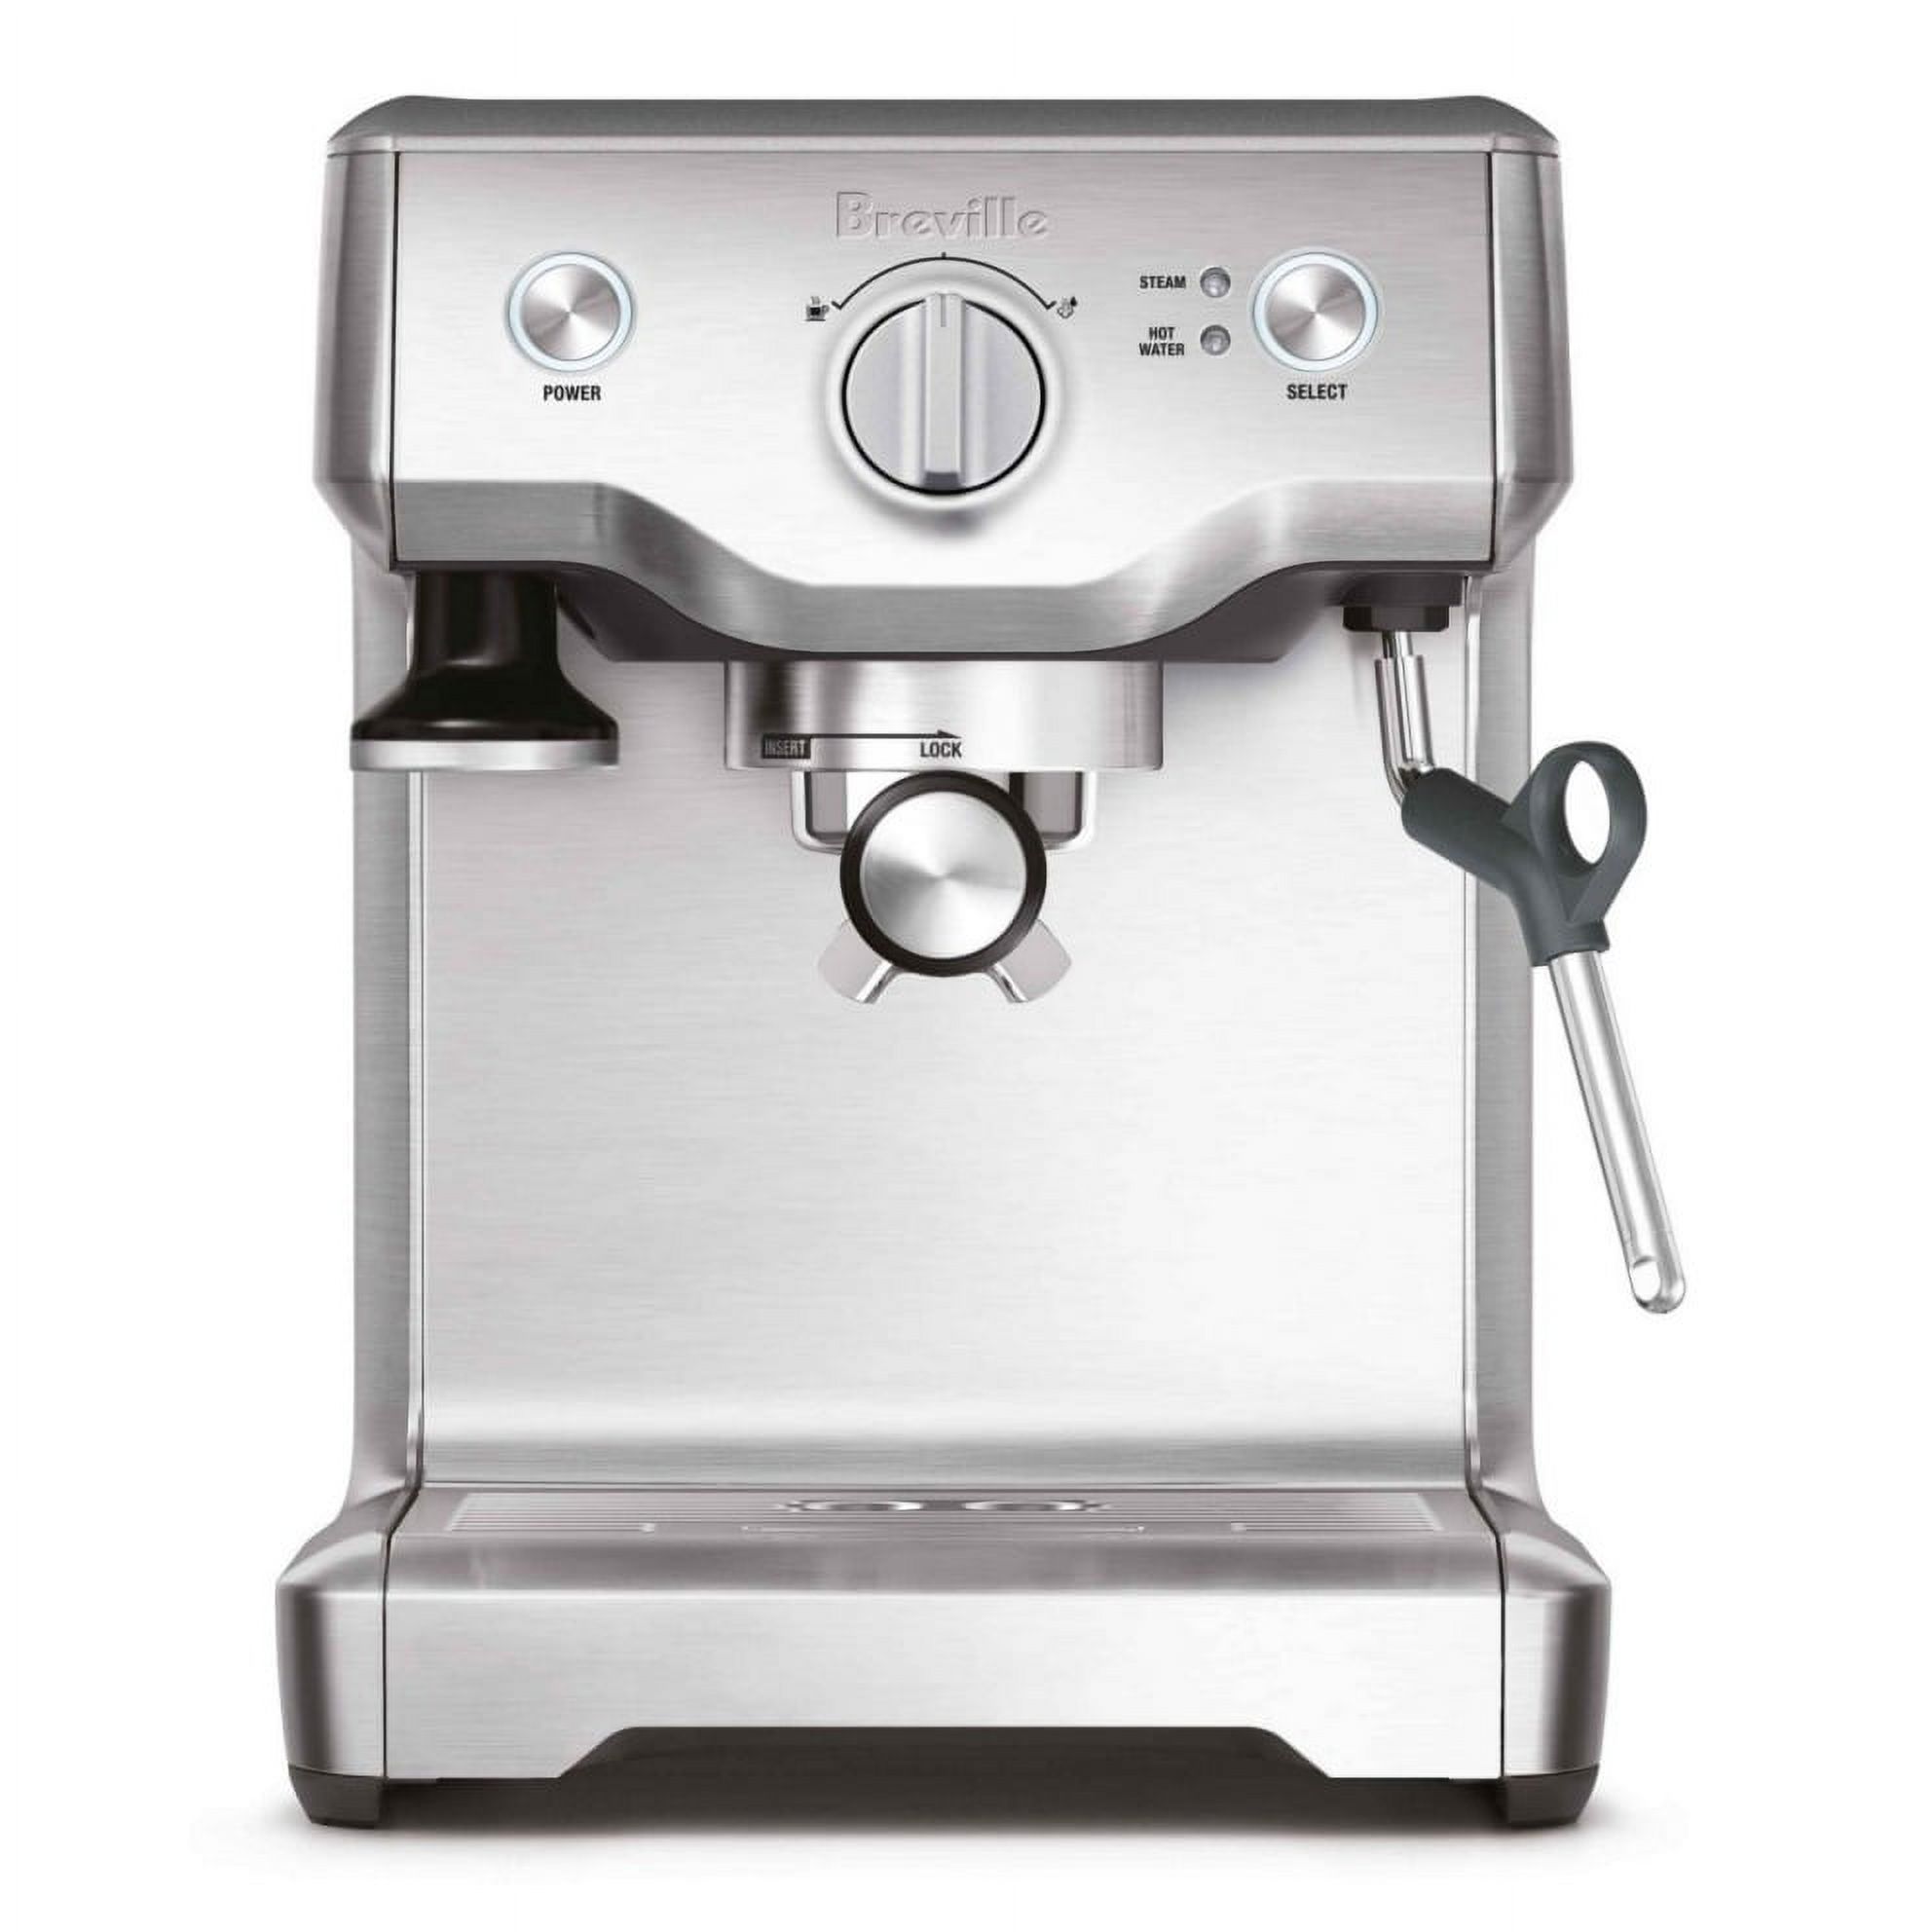 Breville Duo Temp Pro Espresso Machine,61 Fluid Ounces, Stainless Steel, BES810BSS - image 1 of 4